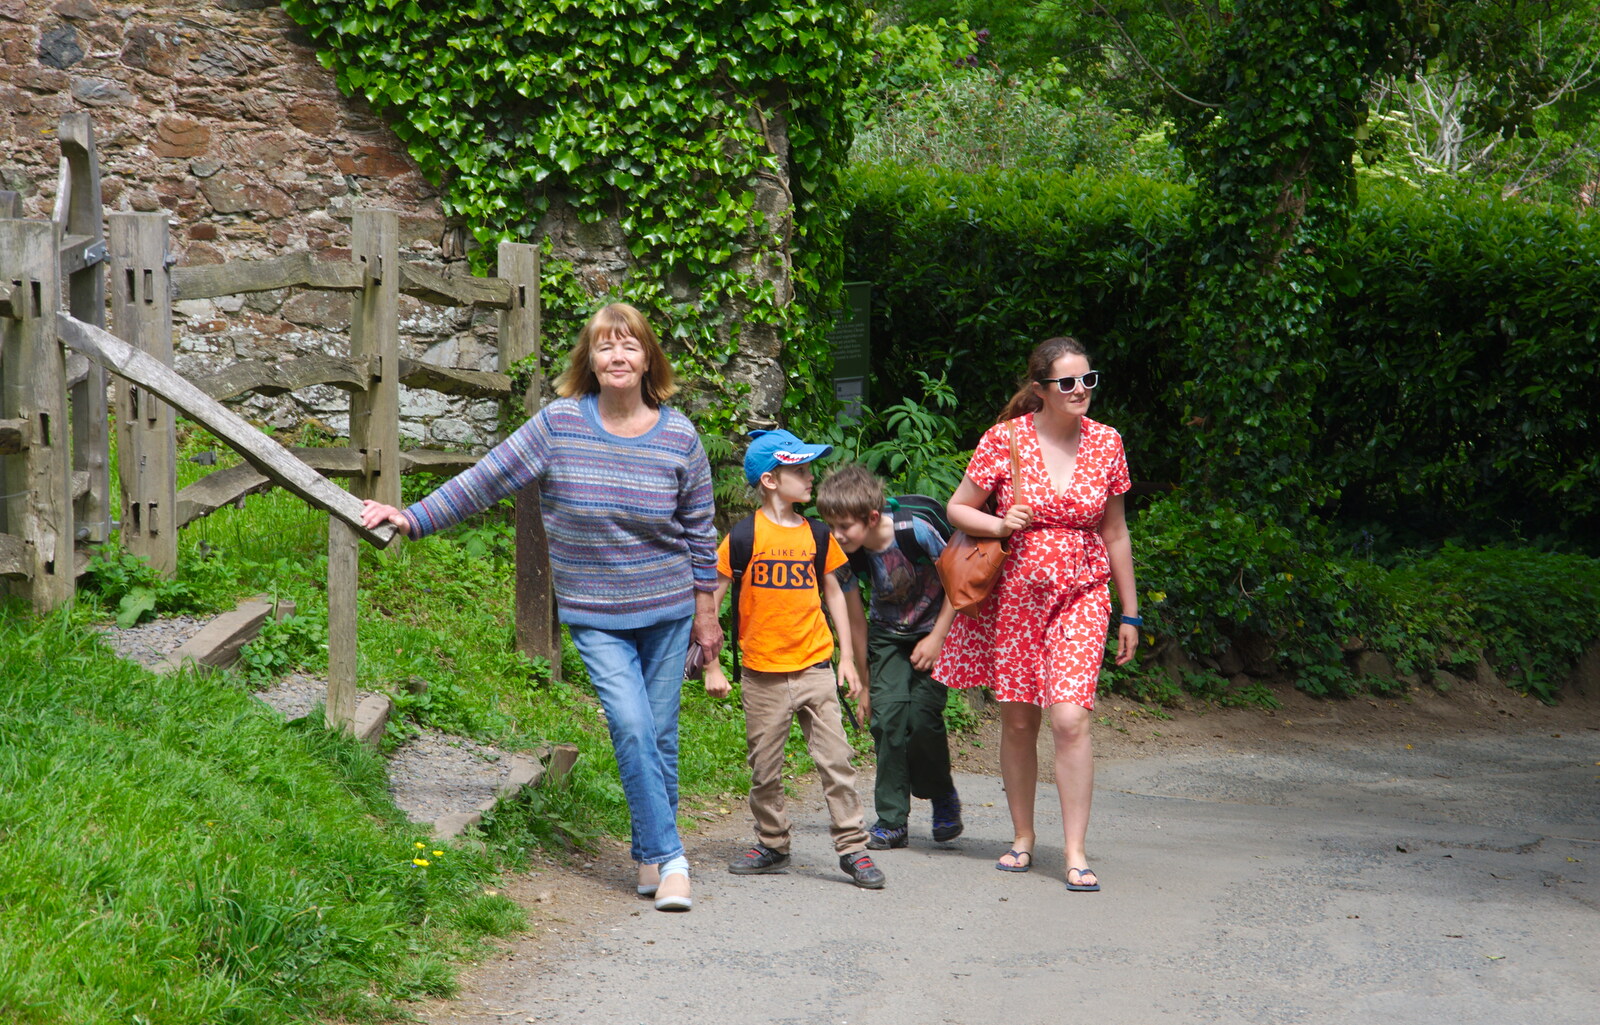 Chagford Lido and a Trip to Parke, Bovey Tracey, Devon - 25th May 2019: Stomping up the steep hill back to the car park